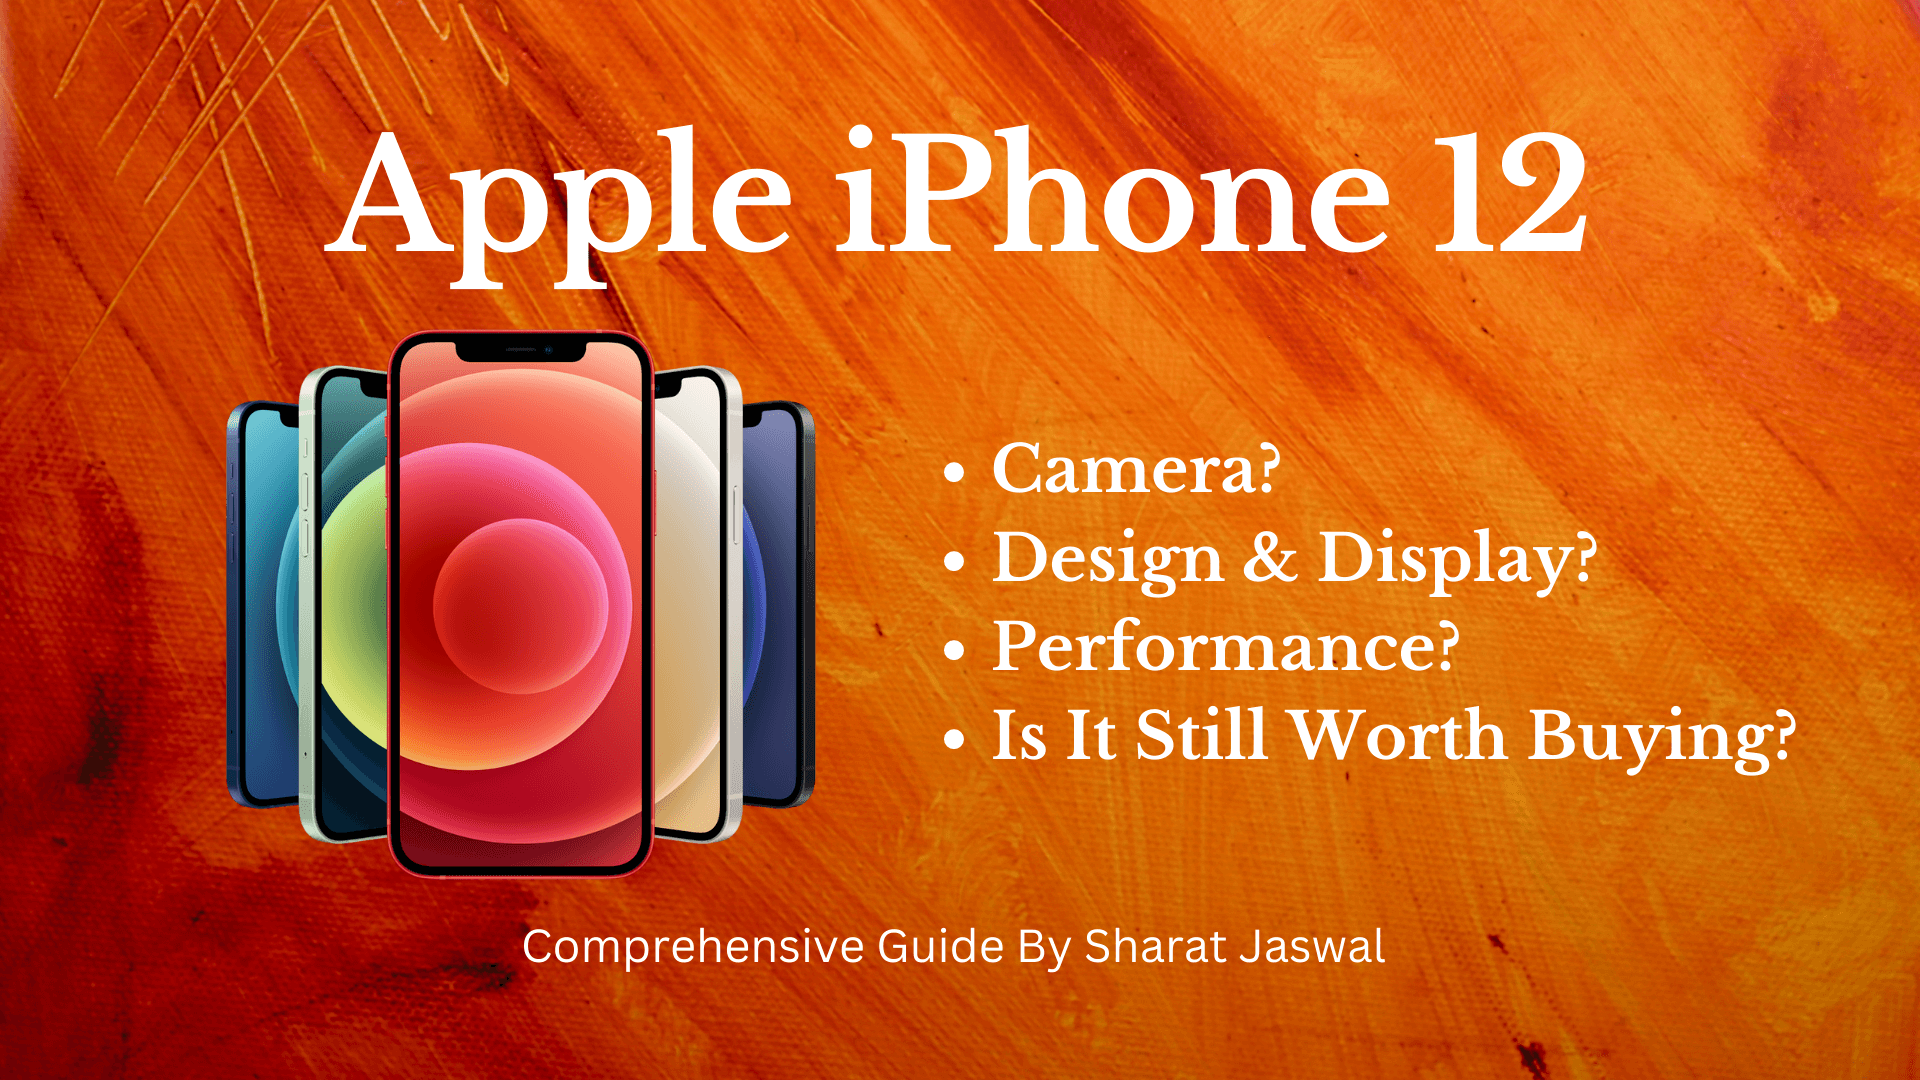 Apple iPhone 12 Comprehensive Guide